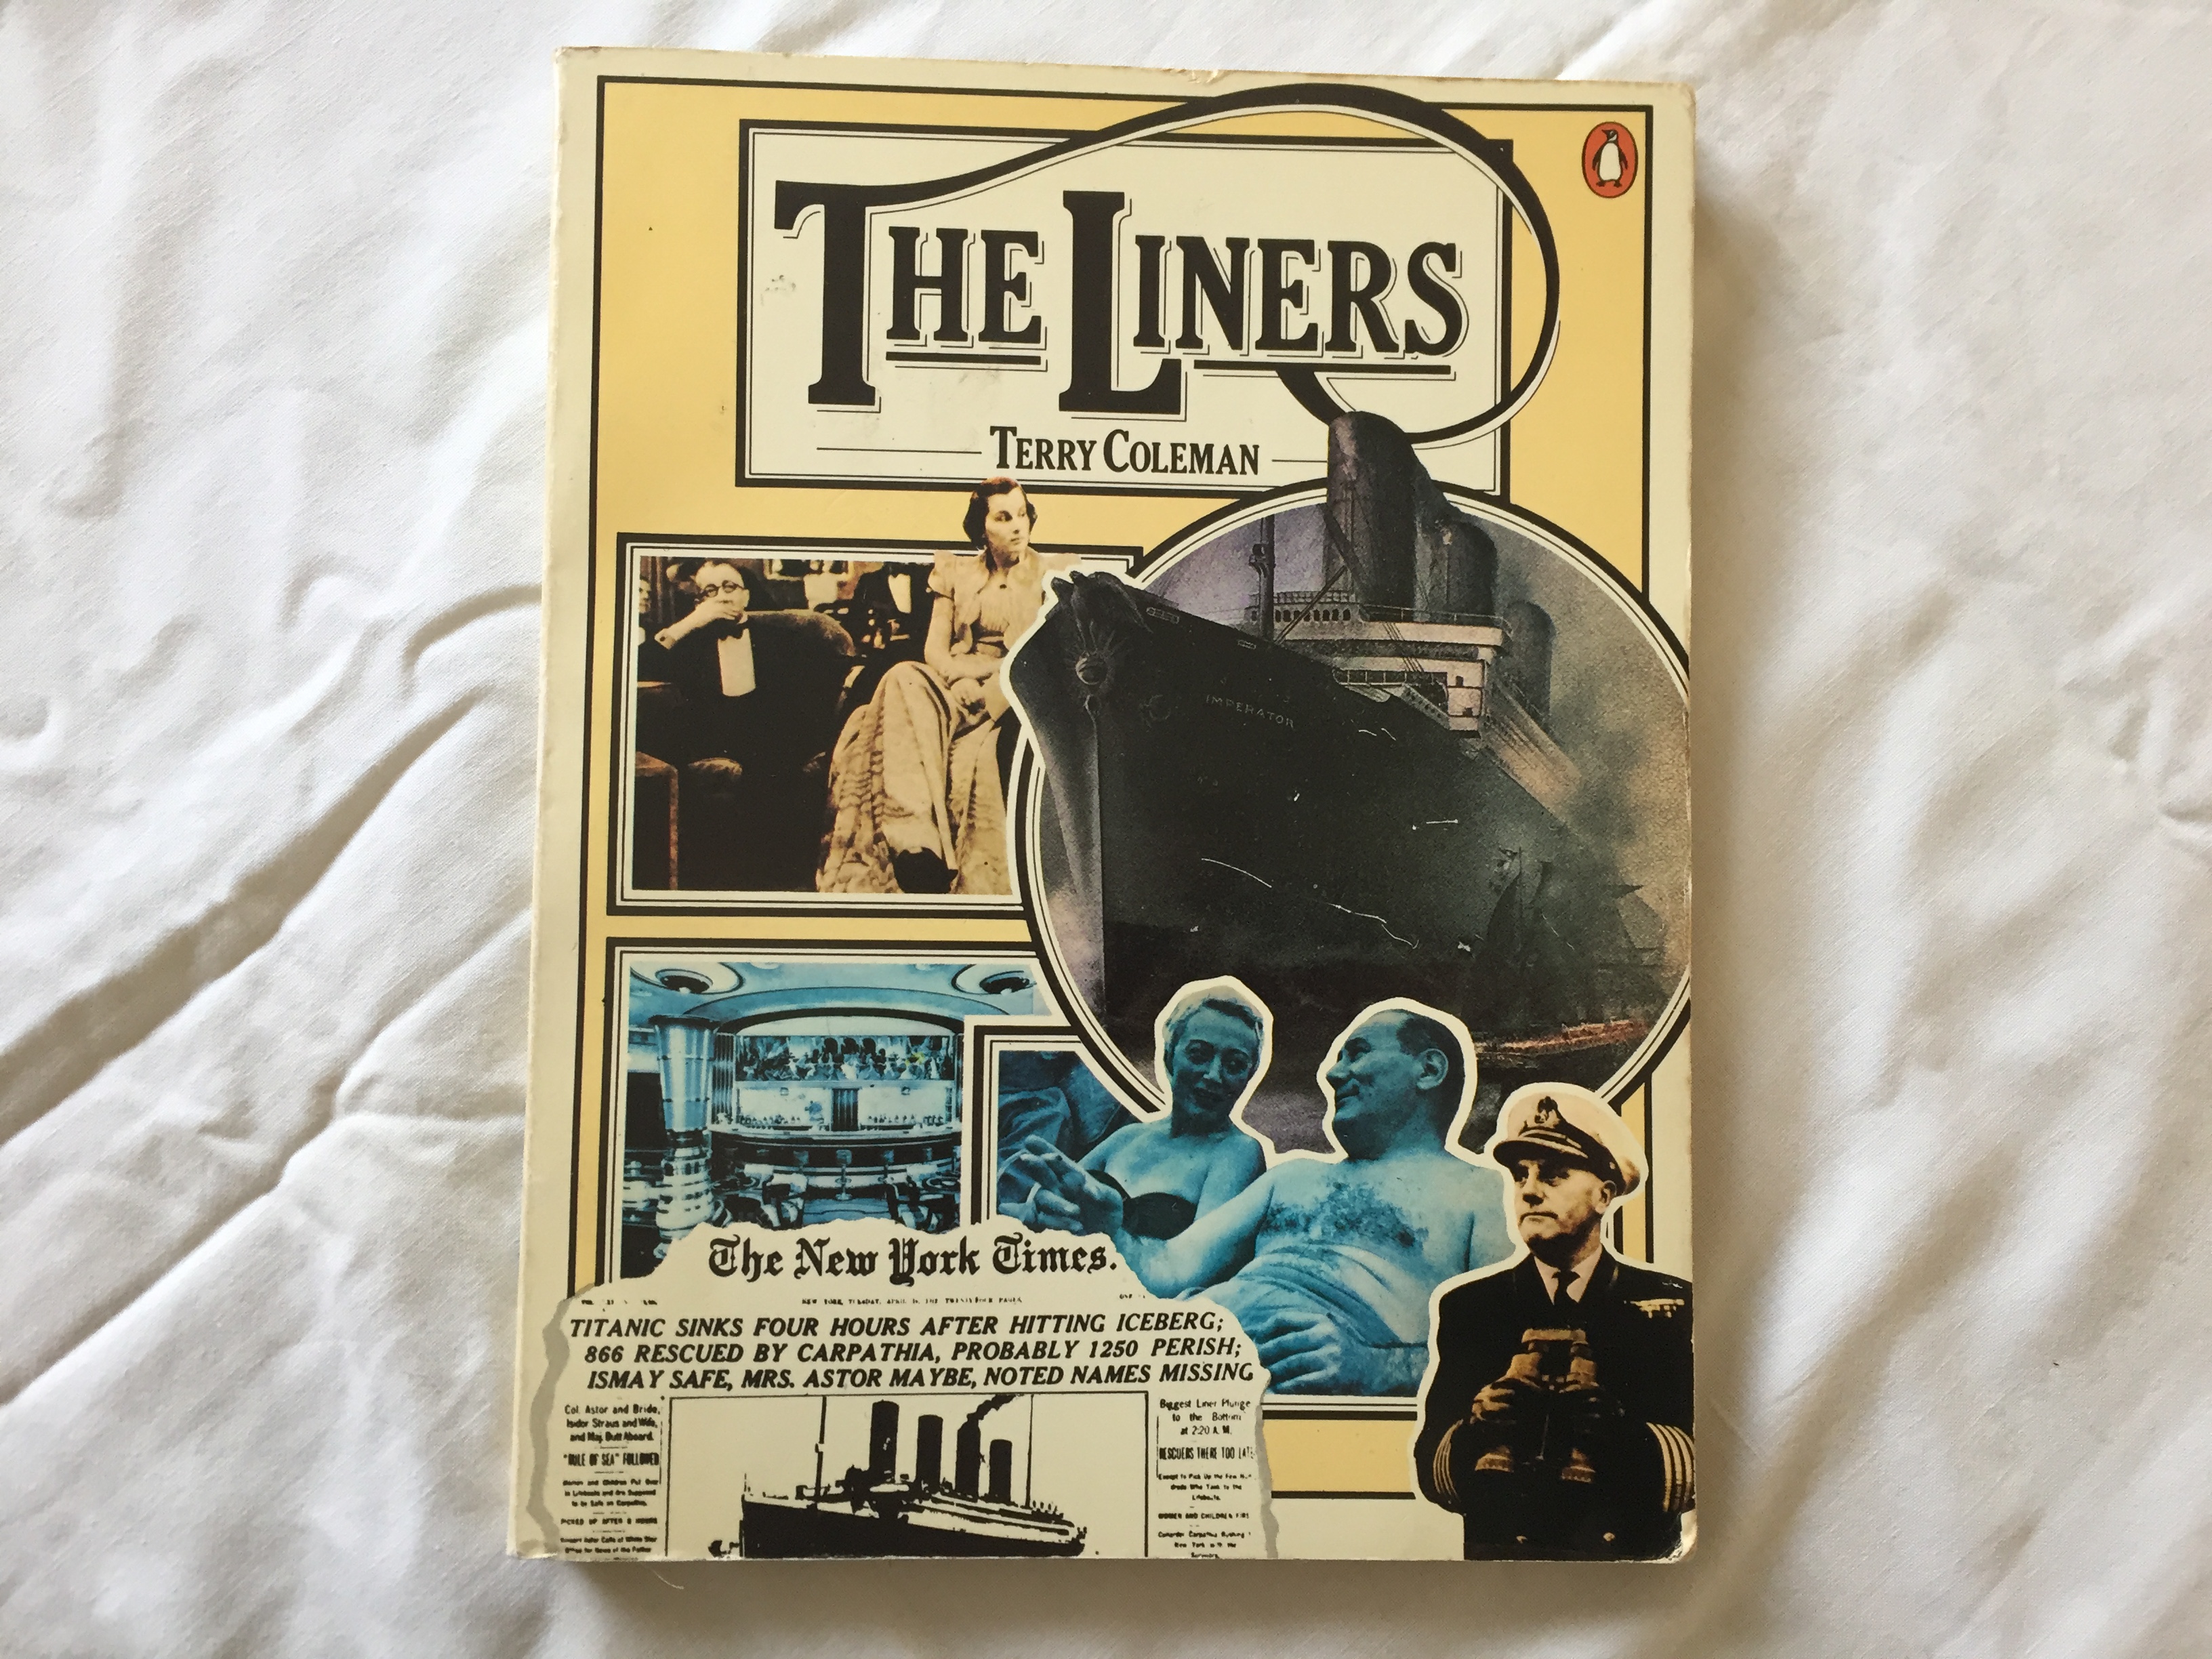 RARE BOOK ENTITLED THE LINERS BY TERRY COLEMAN